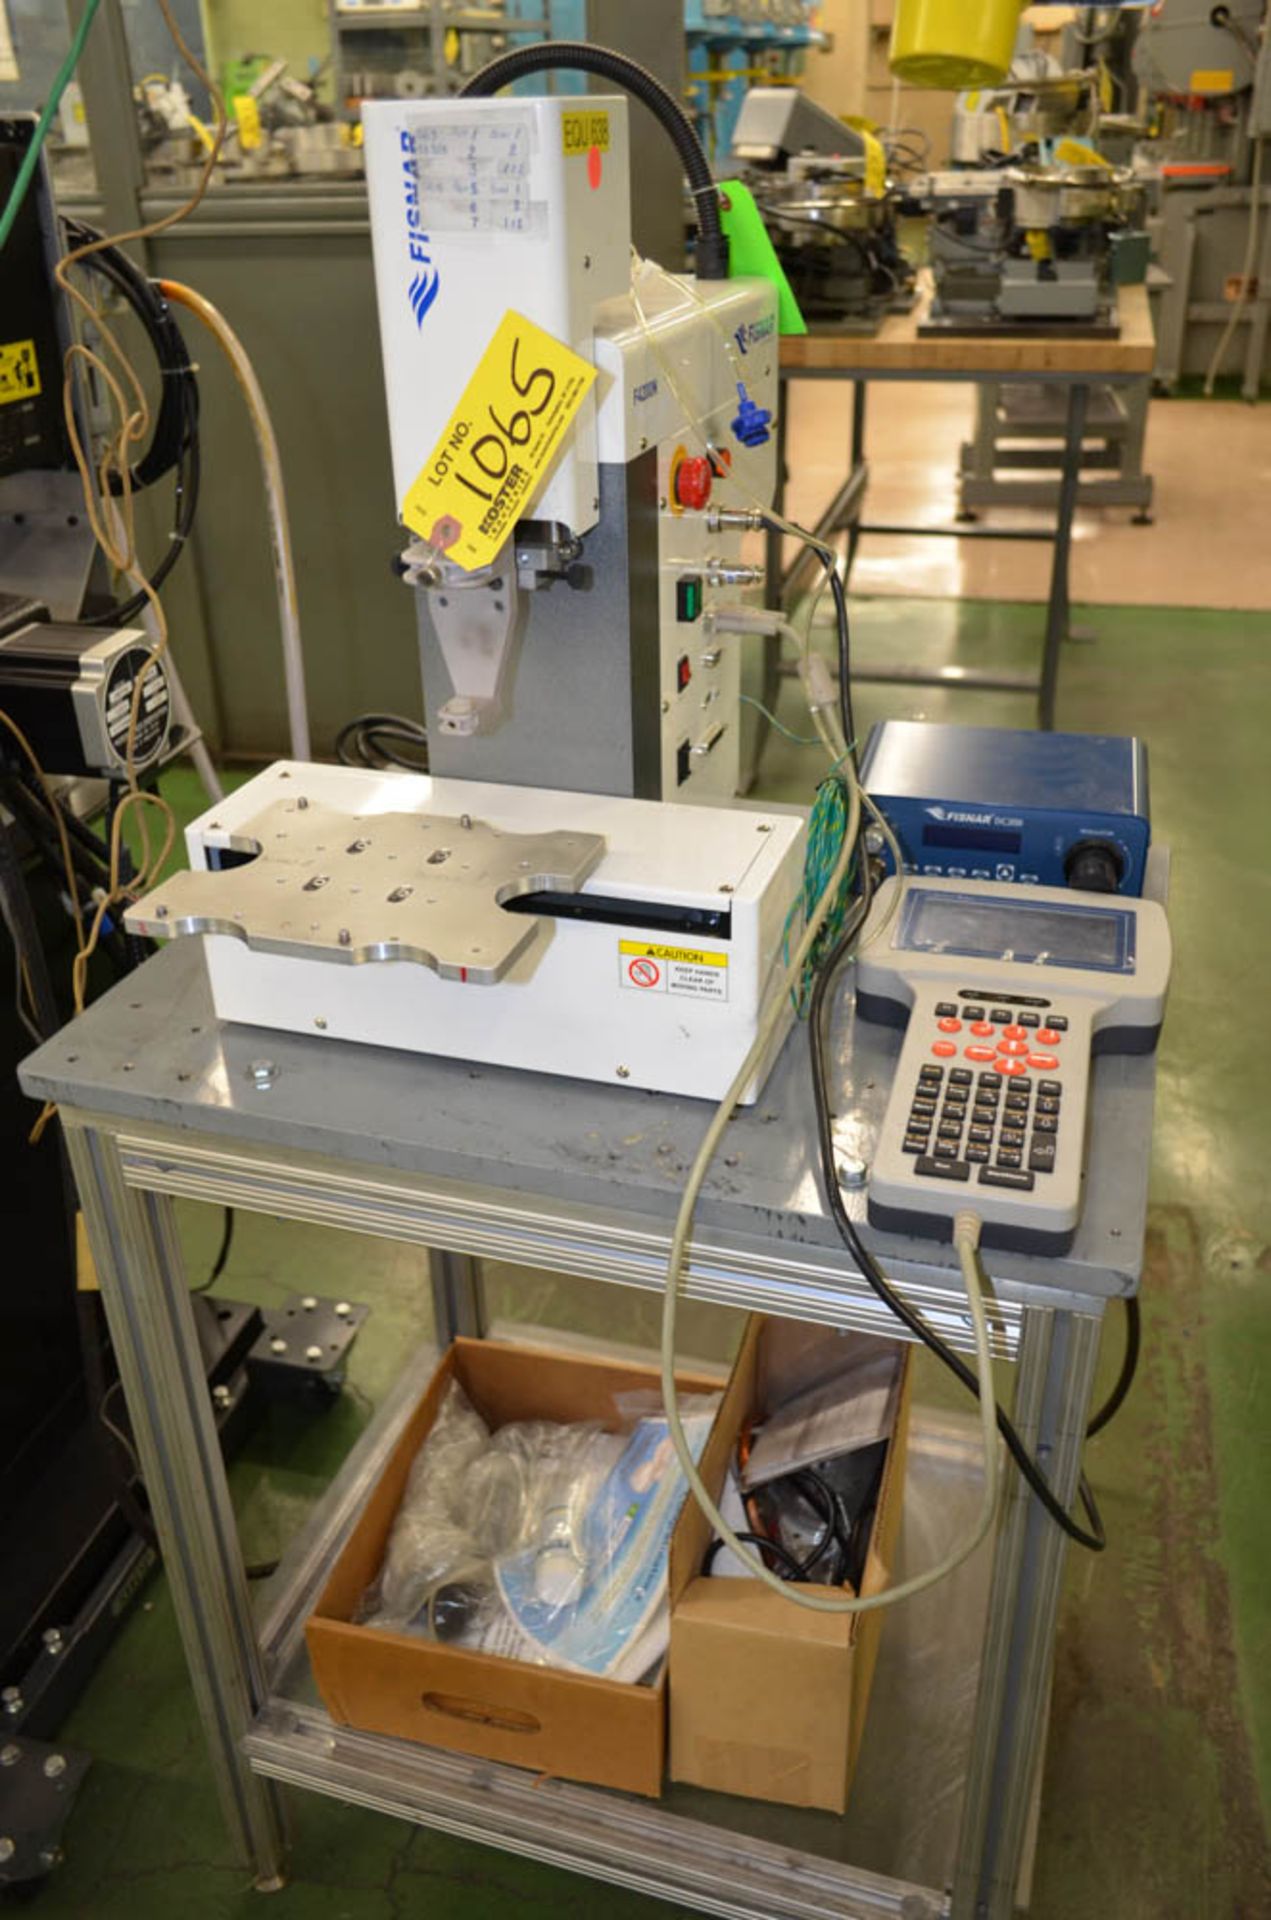 FISNAR MDL. F4200N AUTOMATIC SOLDER DISPENSING UNIT, WITH FISNAR CONTROLLER, PENDANT CONTROLS